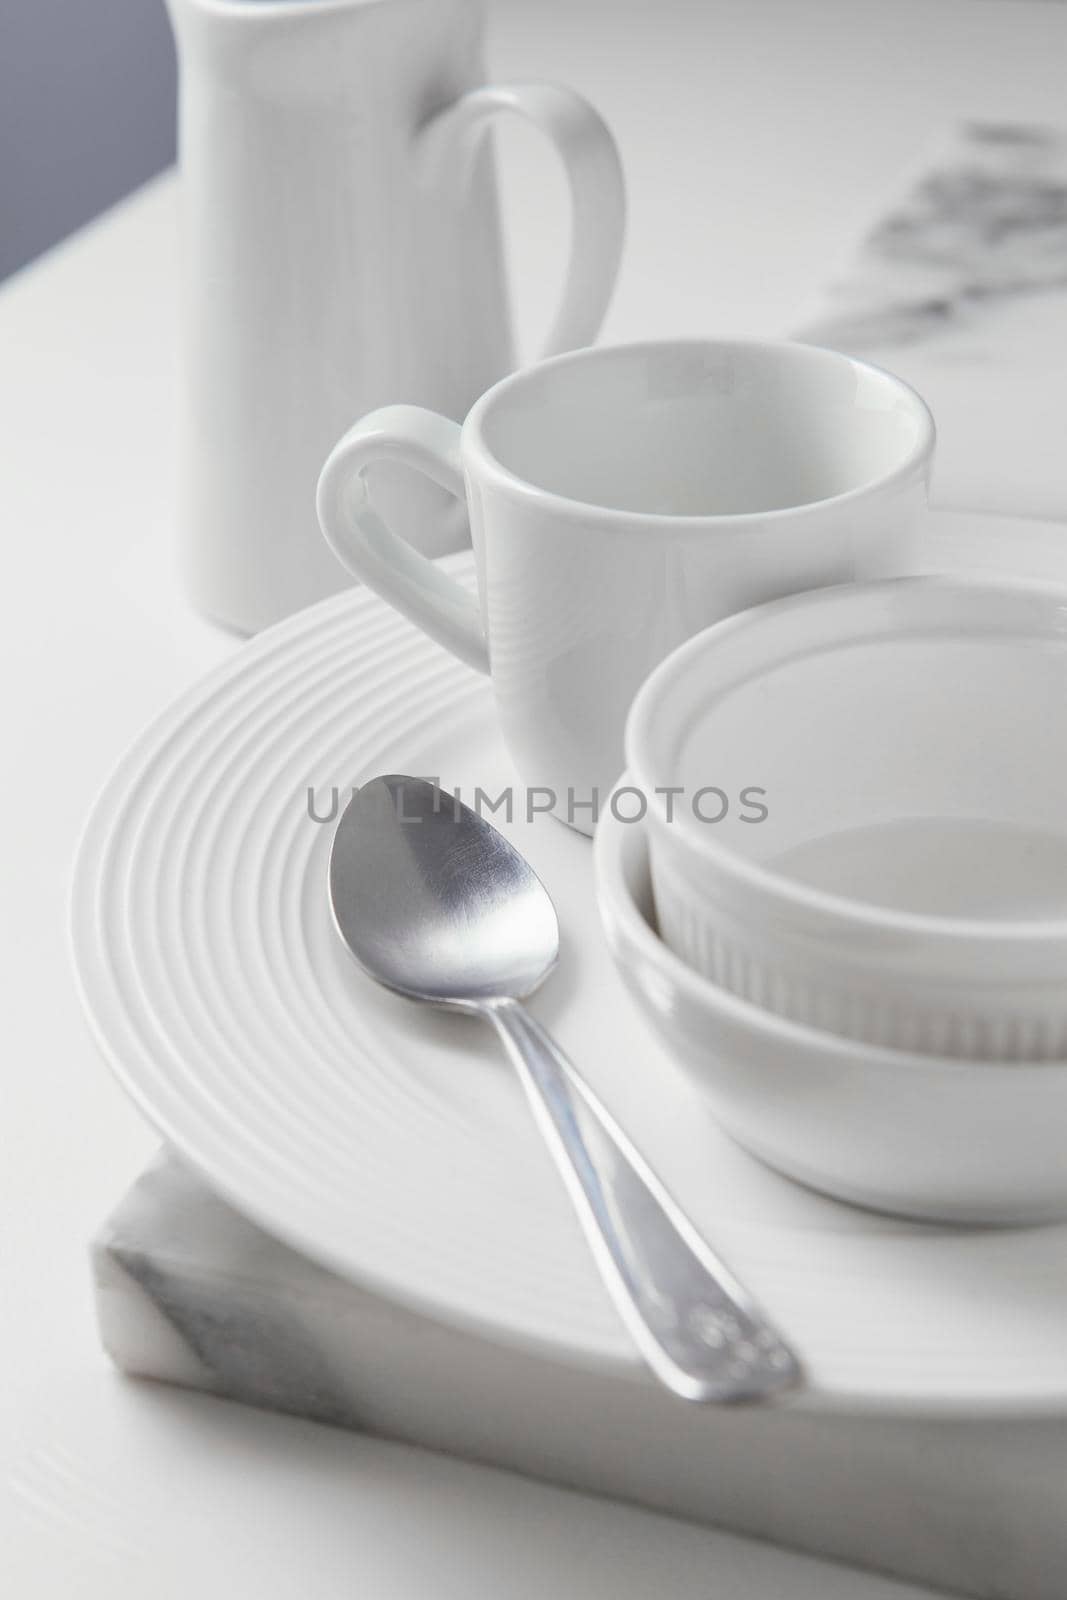 composition elegant tableware table. High quality photo by Zahard